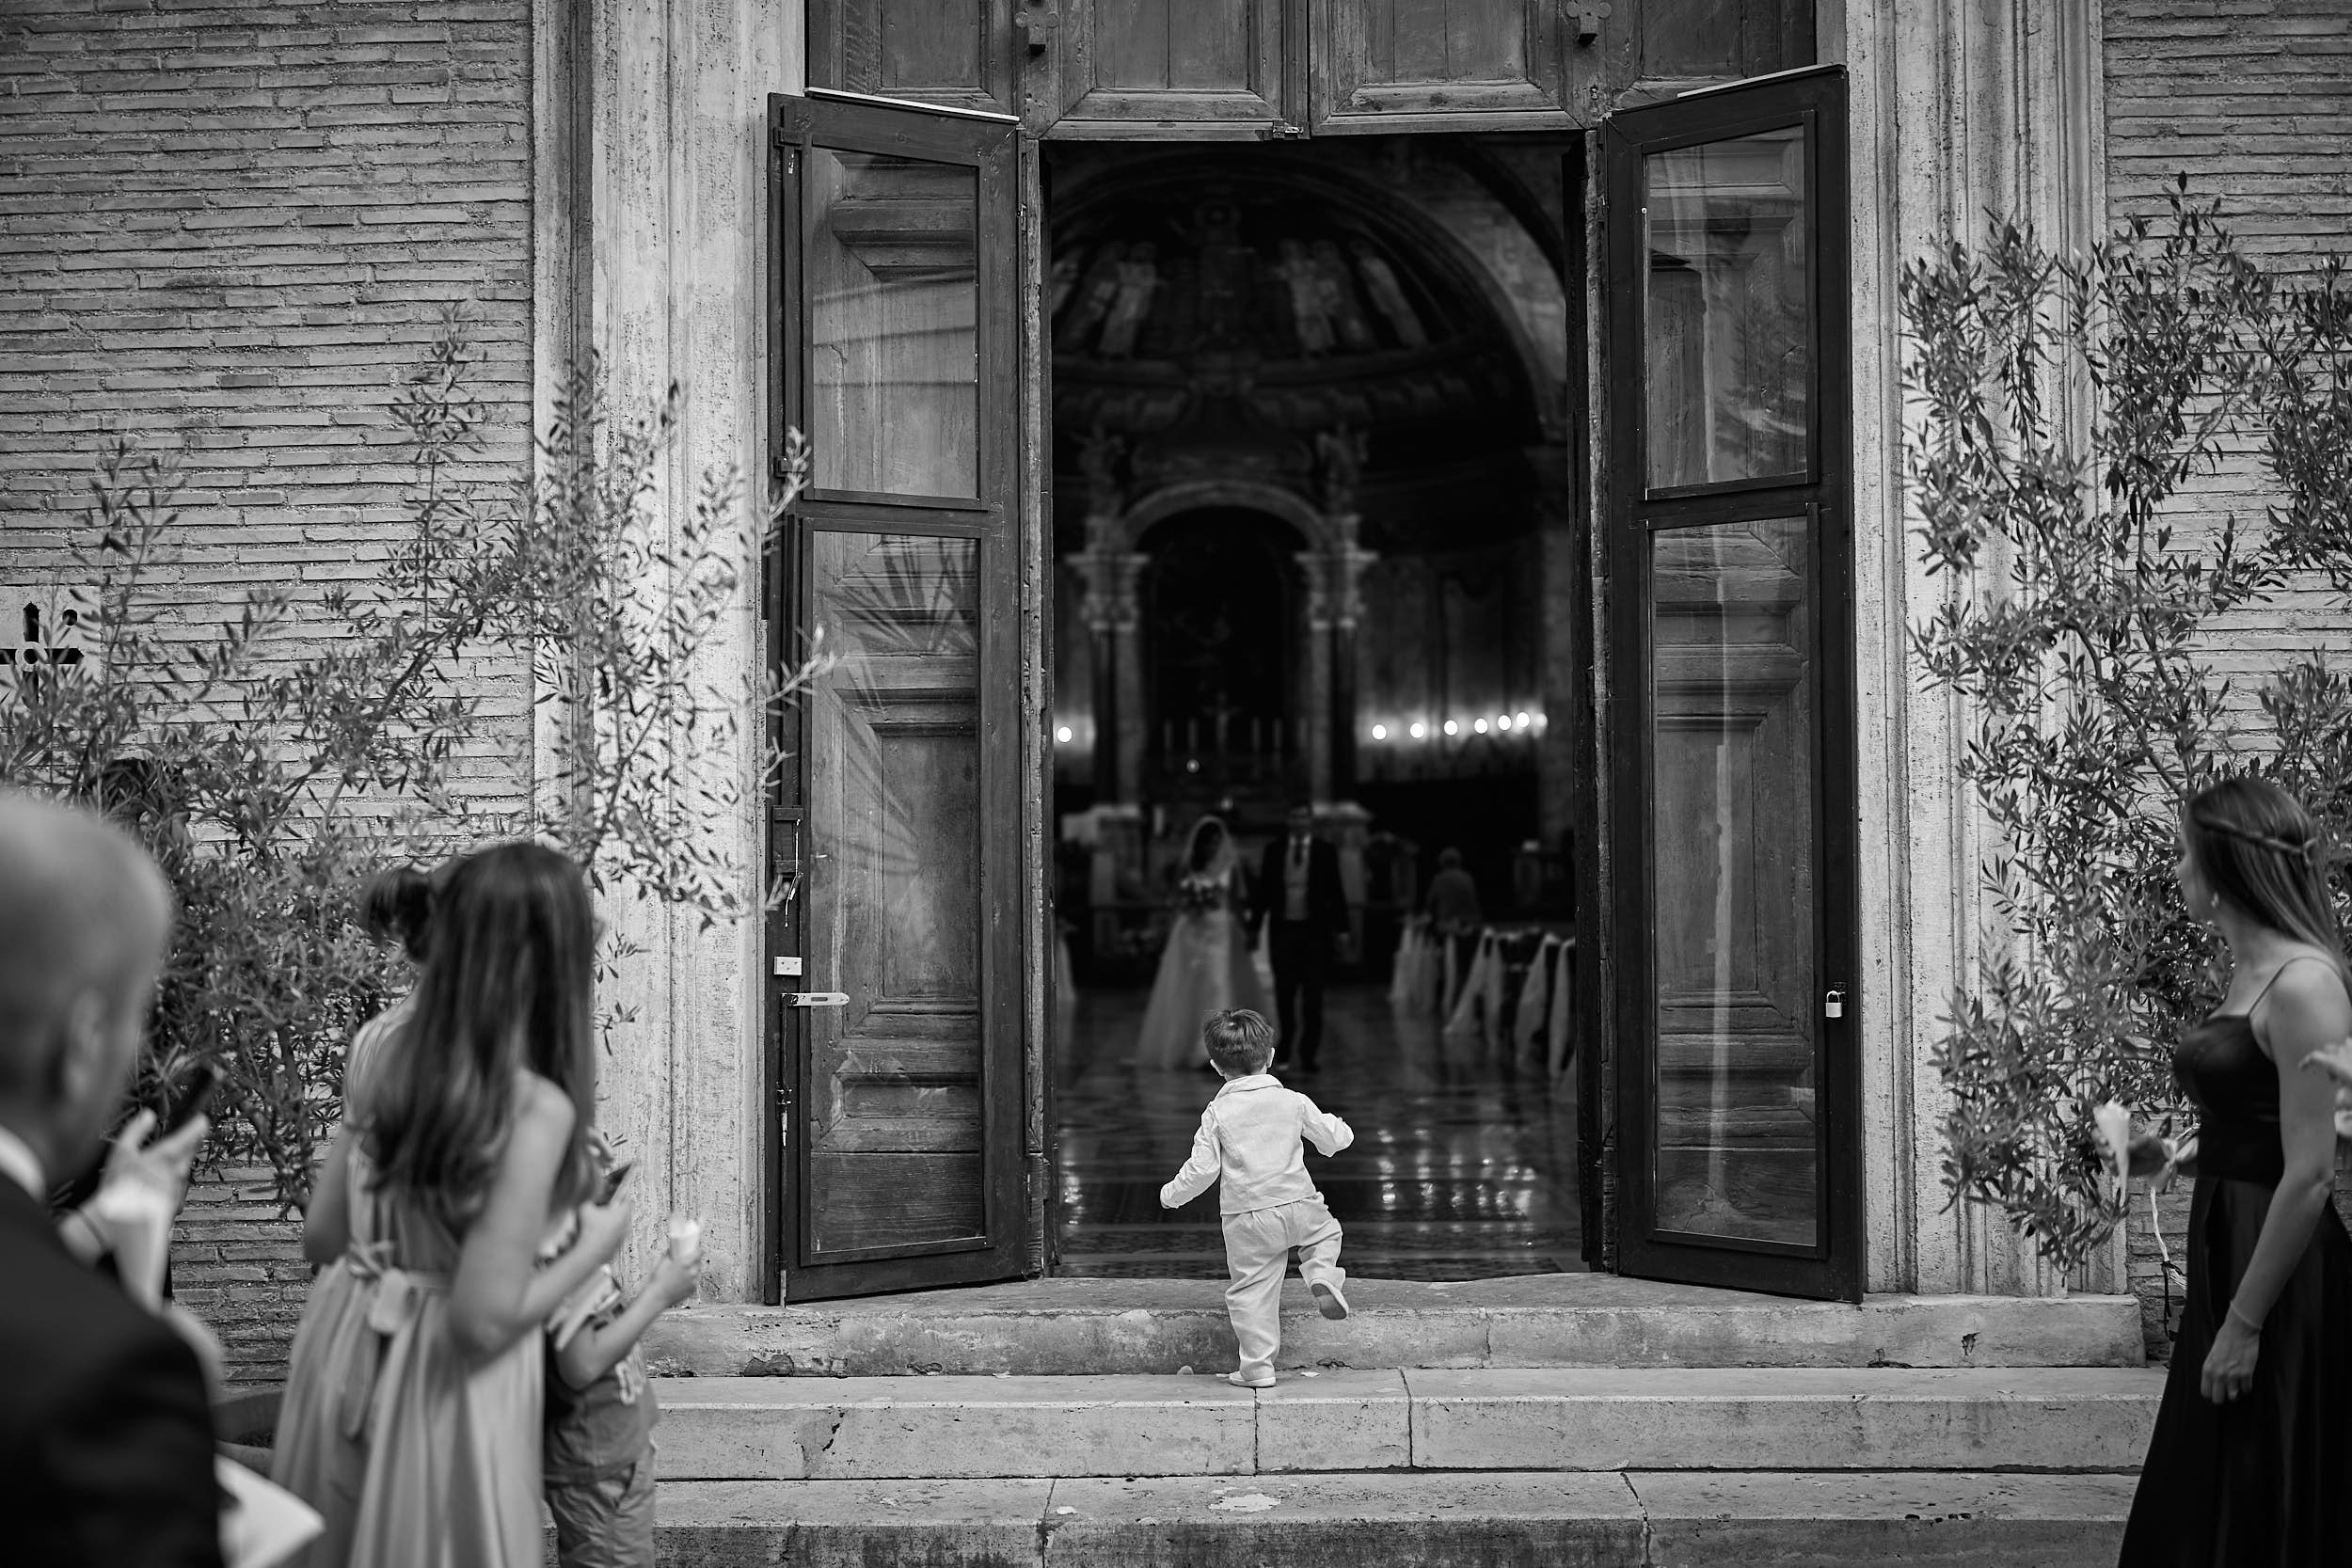 Little son going for the bride and the groom, while they're coming out of the church